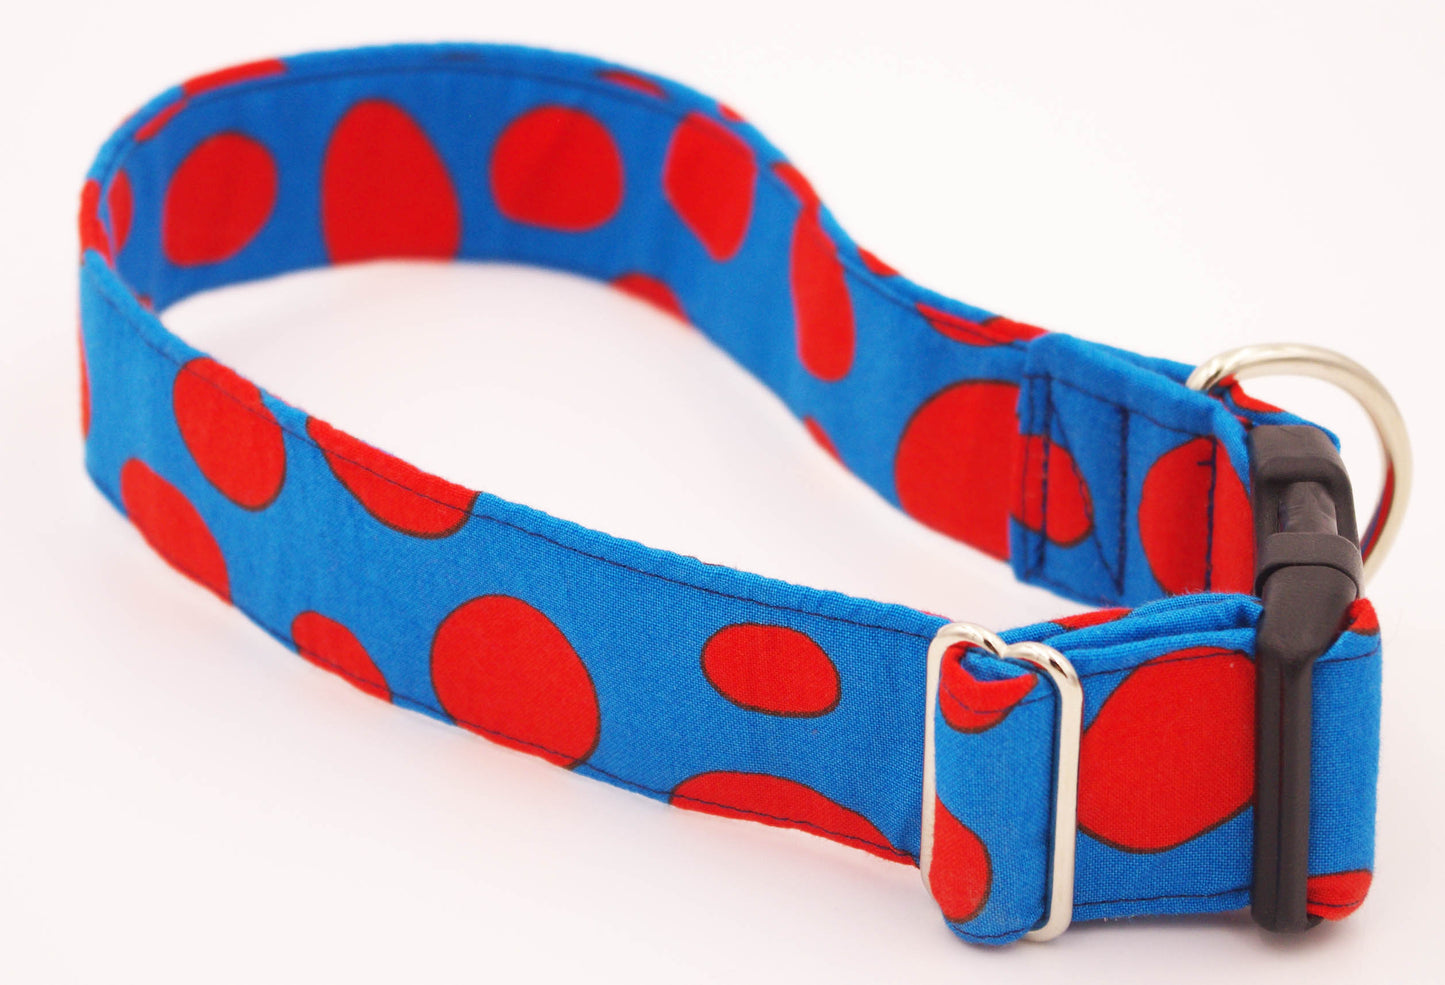 Blue and Red Polka Dot Fabric Collar